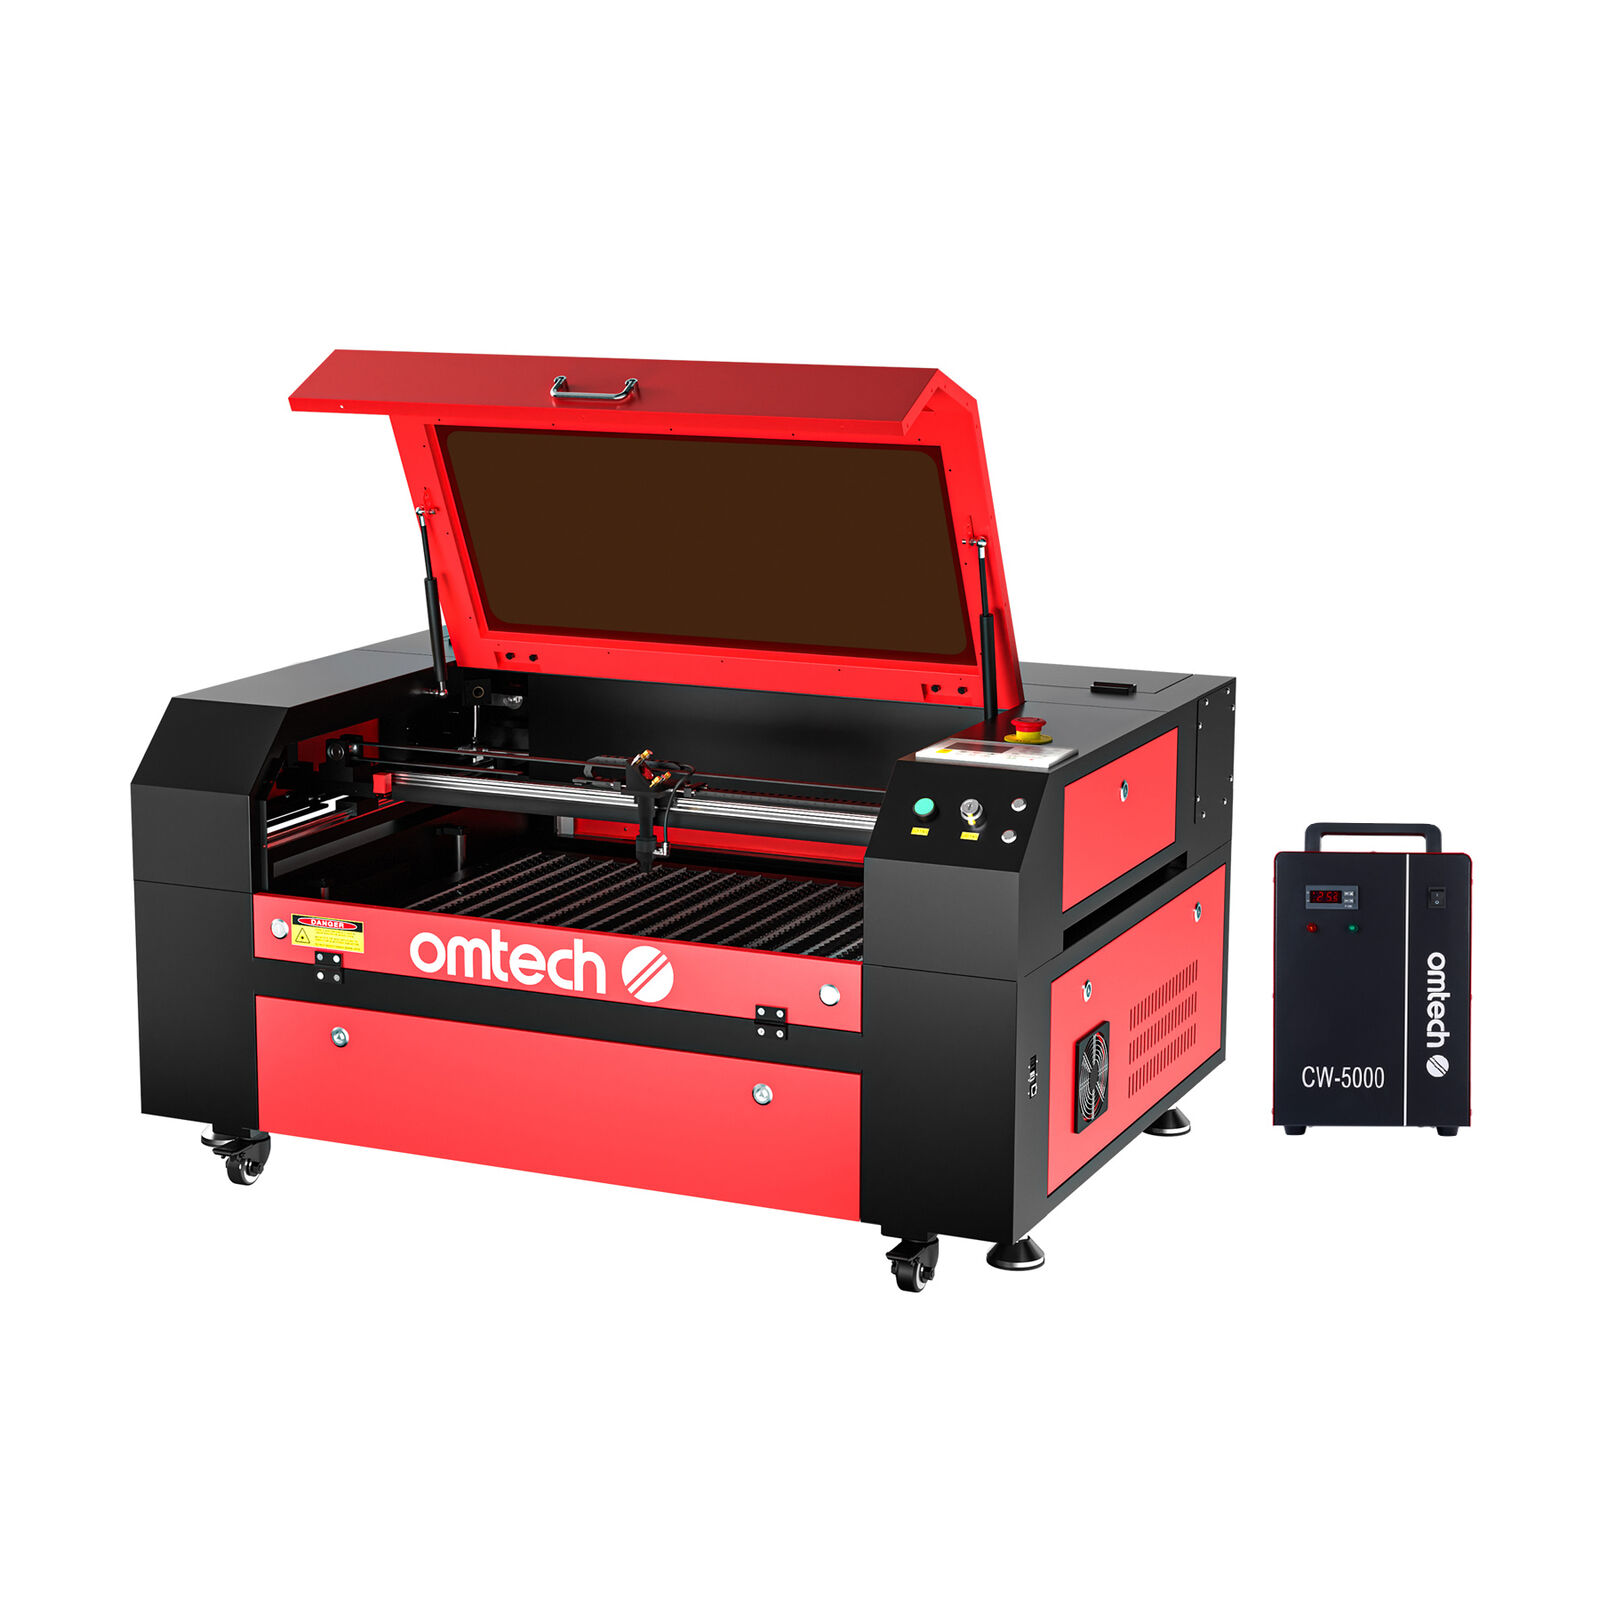 OMTech 60W 28x20 CO2 Laser Engraver Cutter Marker with 9L CW-5000 Water Chiller